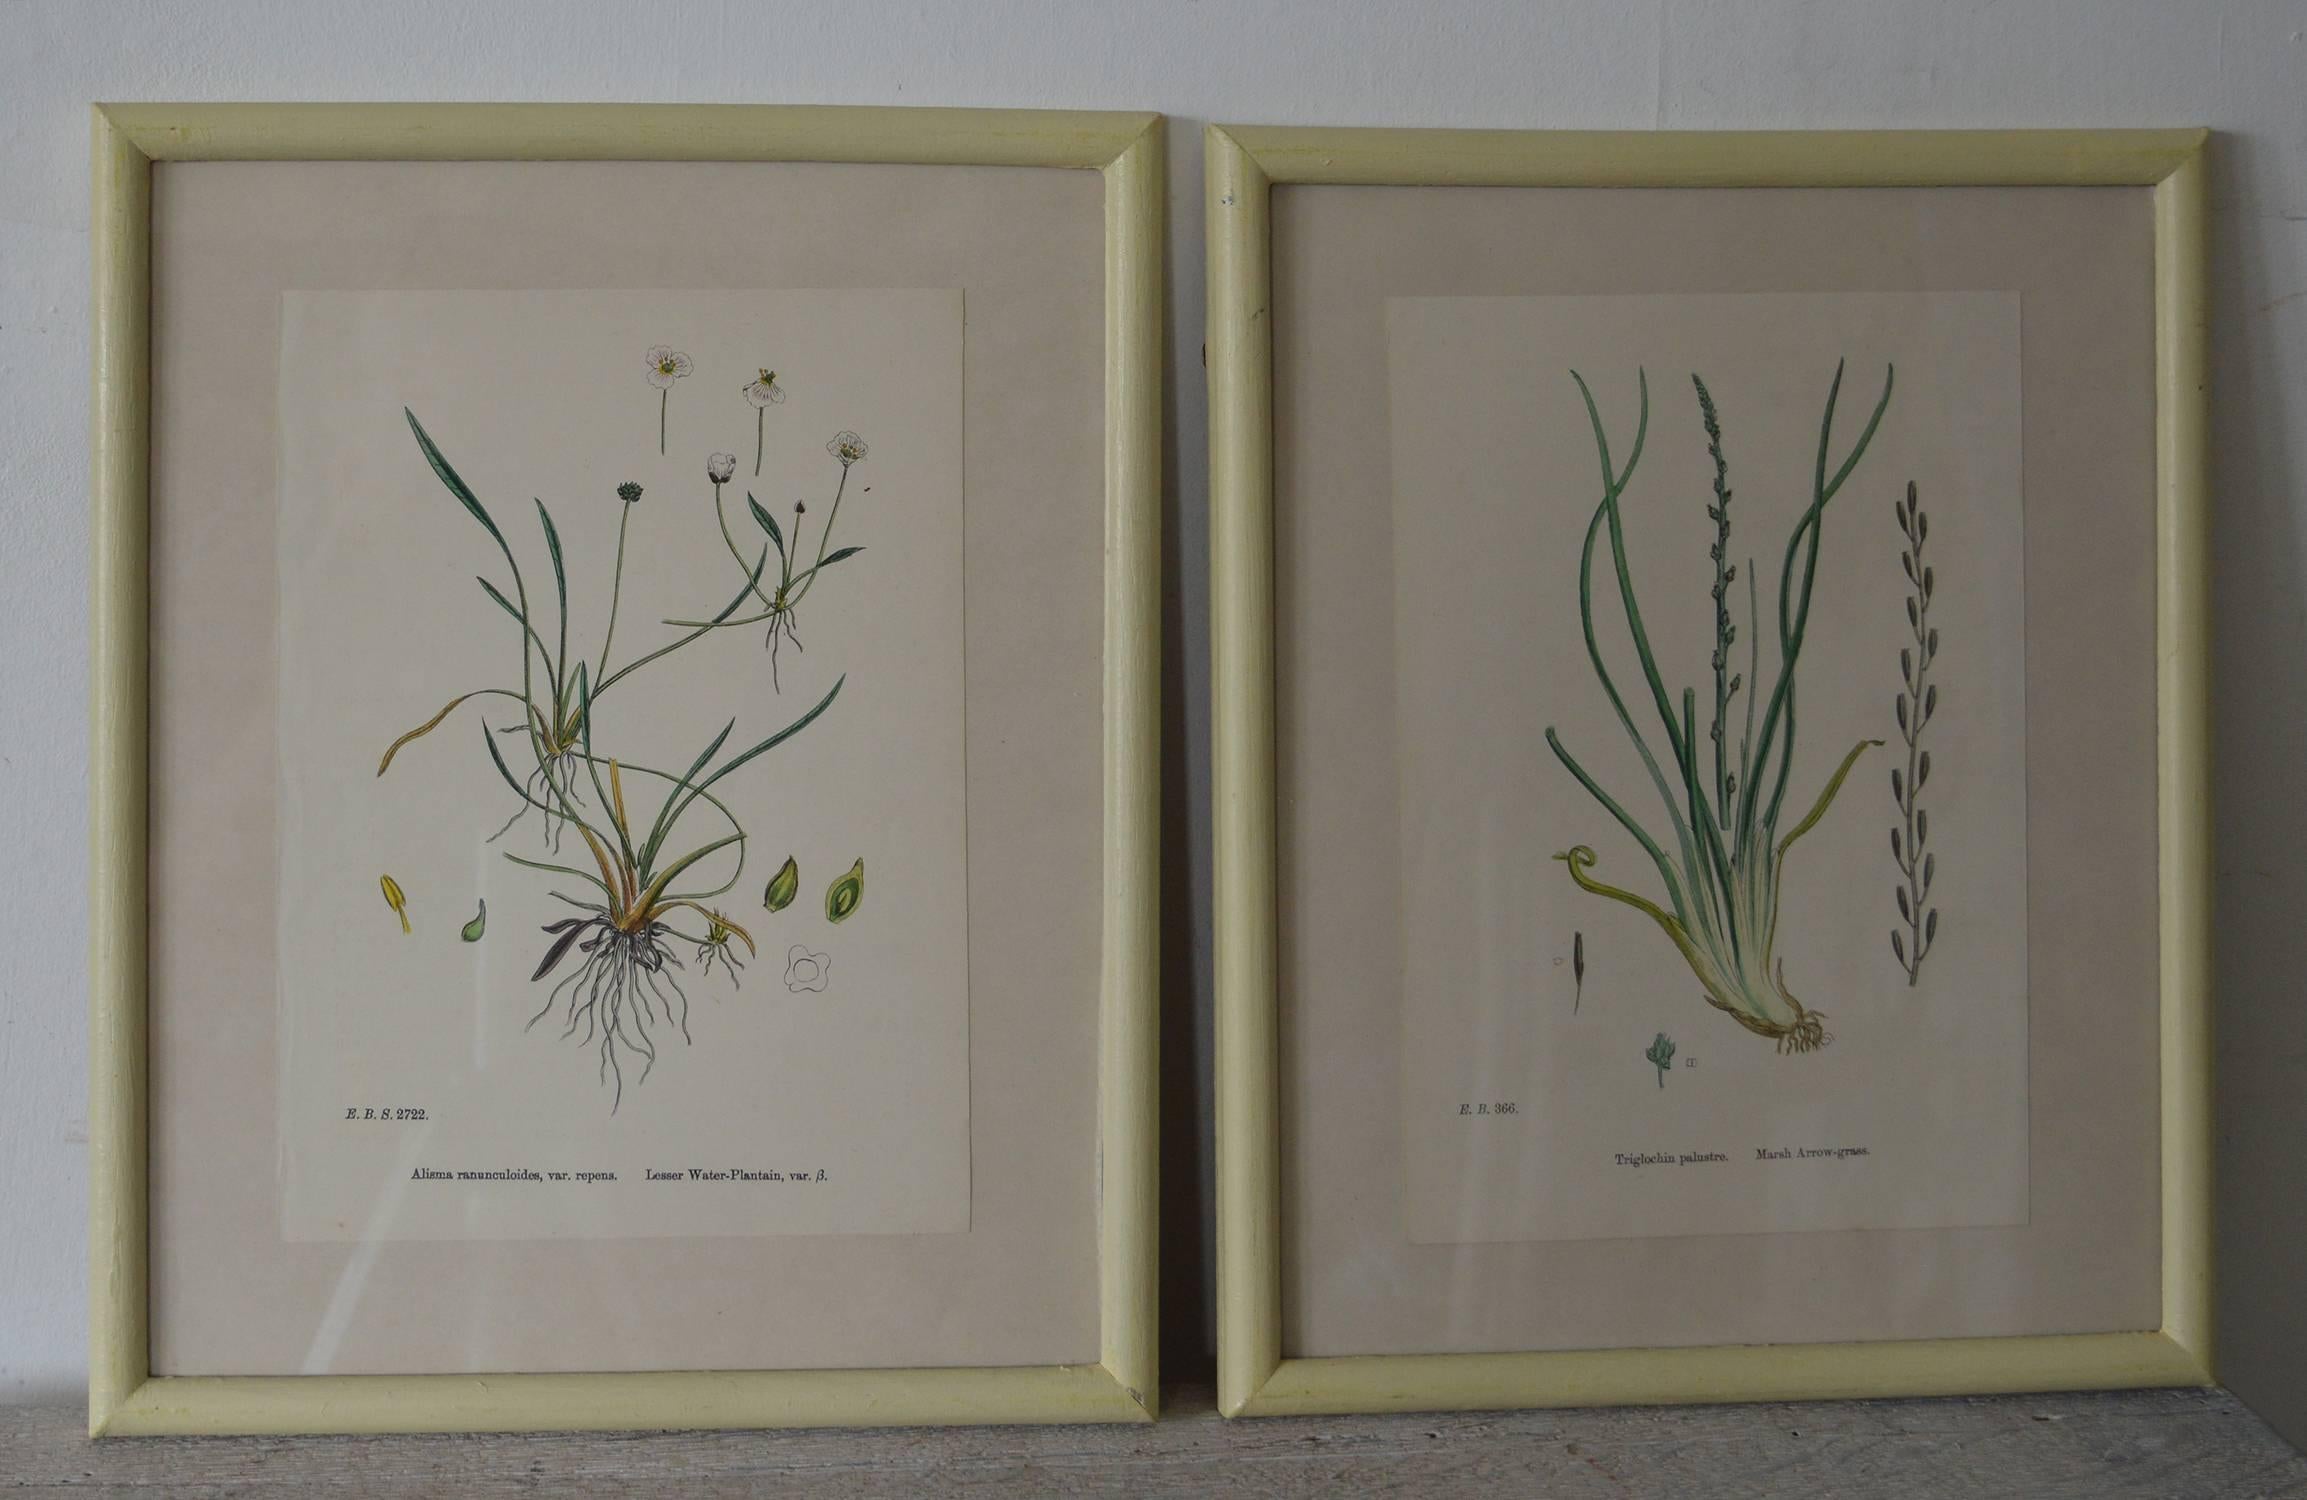 Six beautiful botanical studies with amazing colors.

Originally drawn by the celebrated botanist, Joseph Hooker working in the early 19th century. (Kew Gardens, London)

Stone lithographs with original color.

Presented in faux ivory painted wood